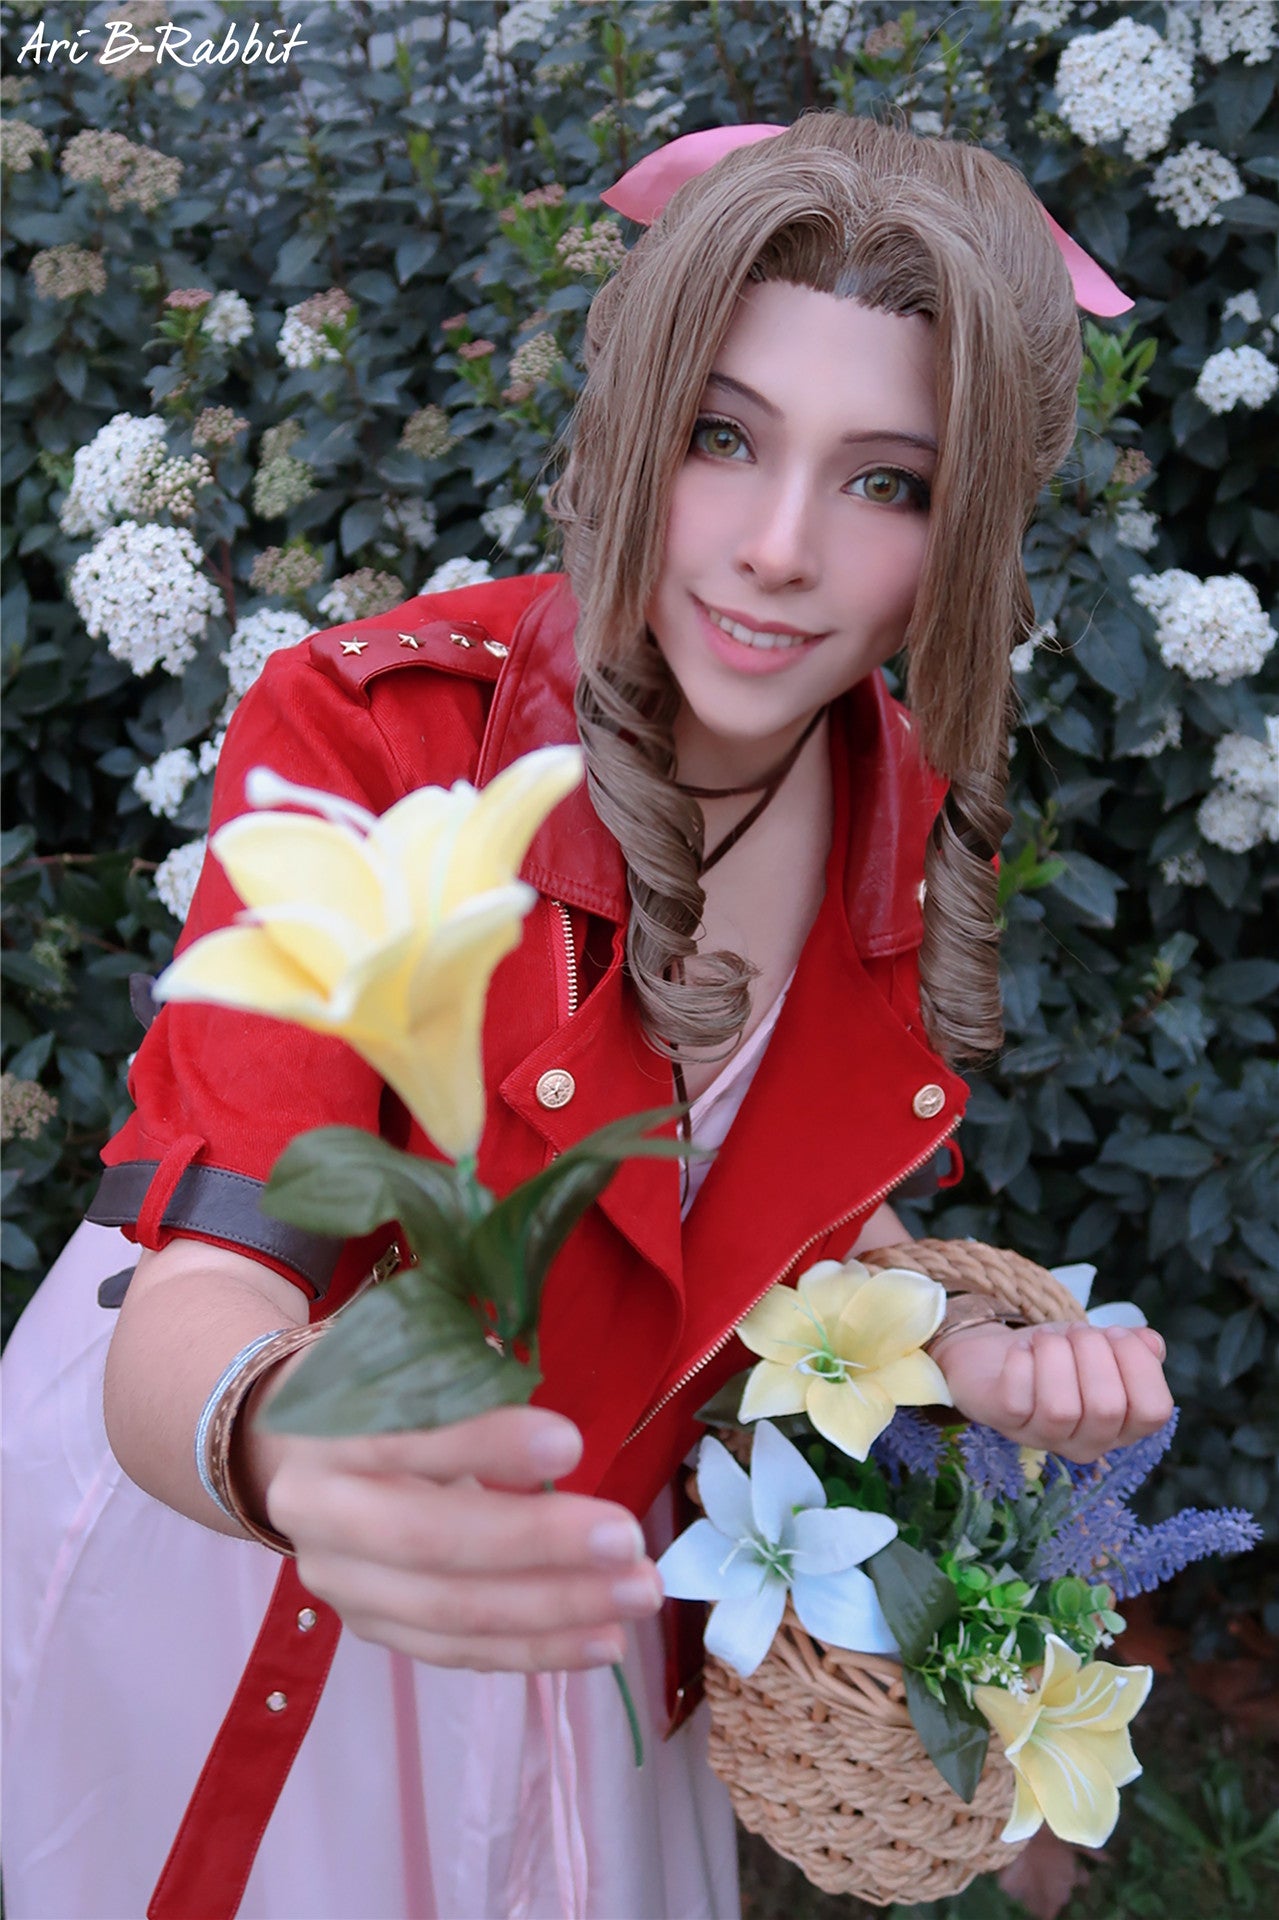 Home › Costumes › Final Fantasy Vii Remake Aerith Gainsborough Cosplay Costume 2804